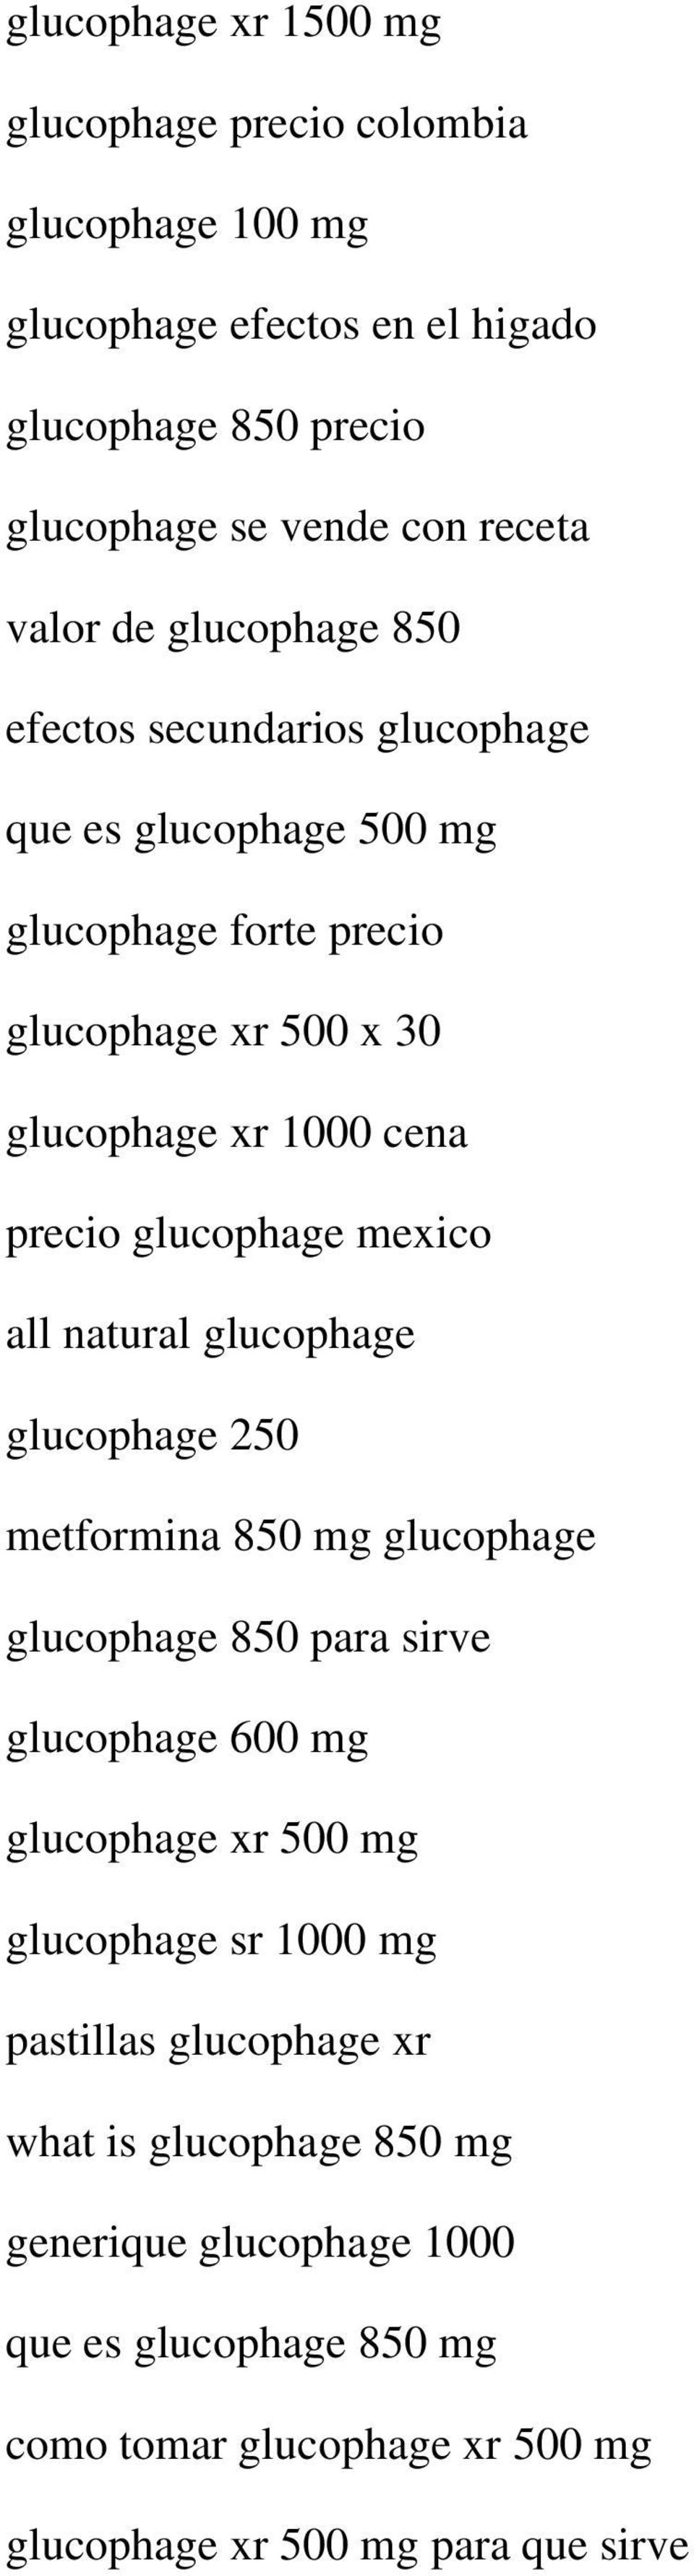 mexico all natural glucophage glucophage 250 metformina 850 mg glucophage glucophage 850 para sirve glucophage 600 mg glucophage xr 500 mg glucophage sr 1000 mg